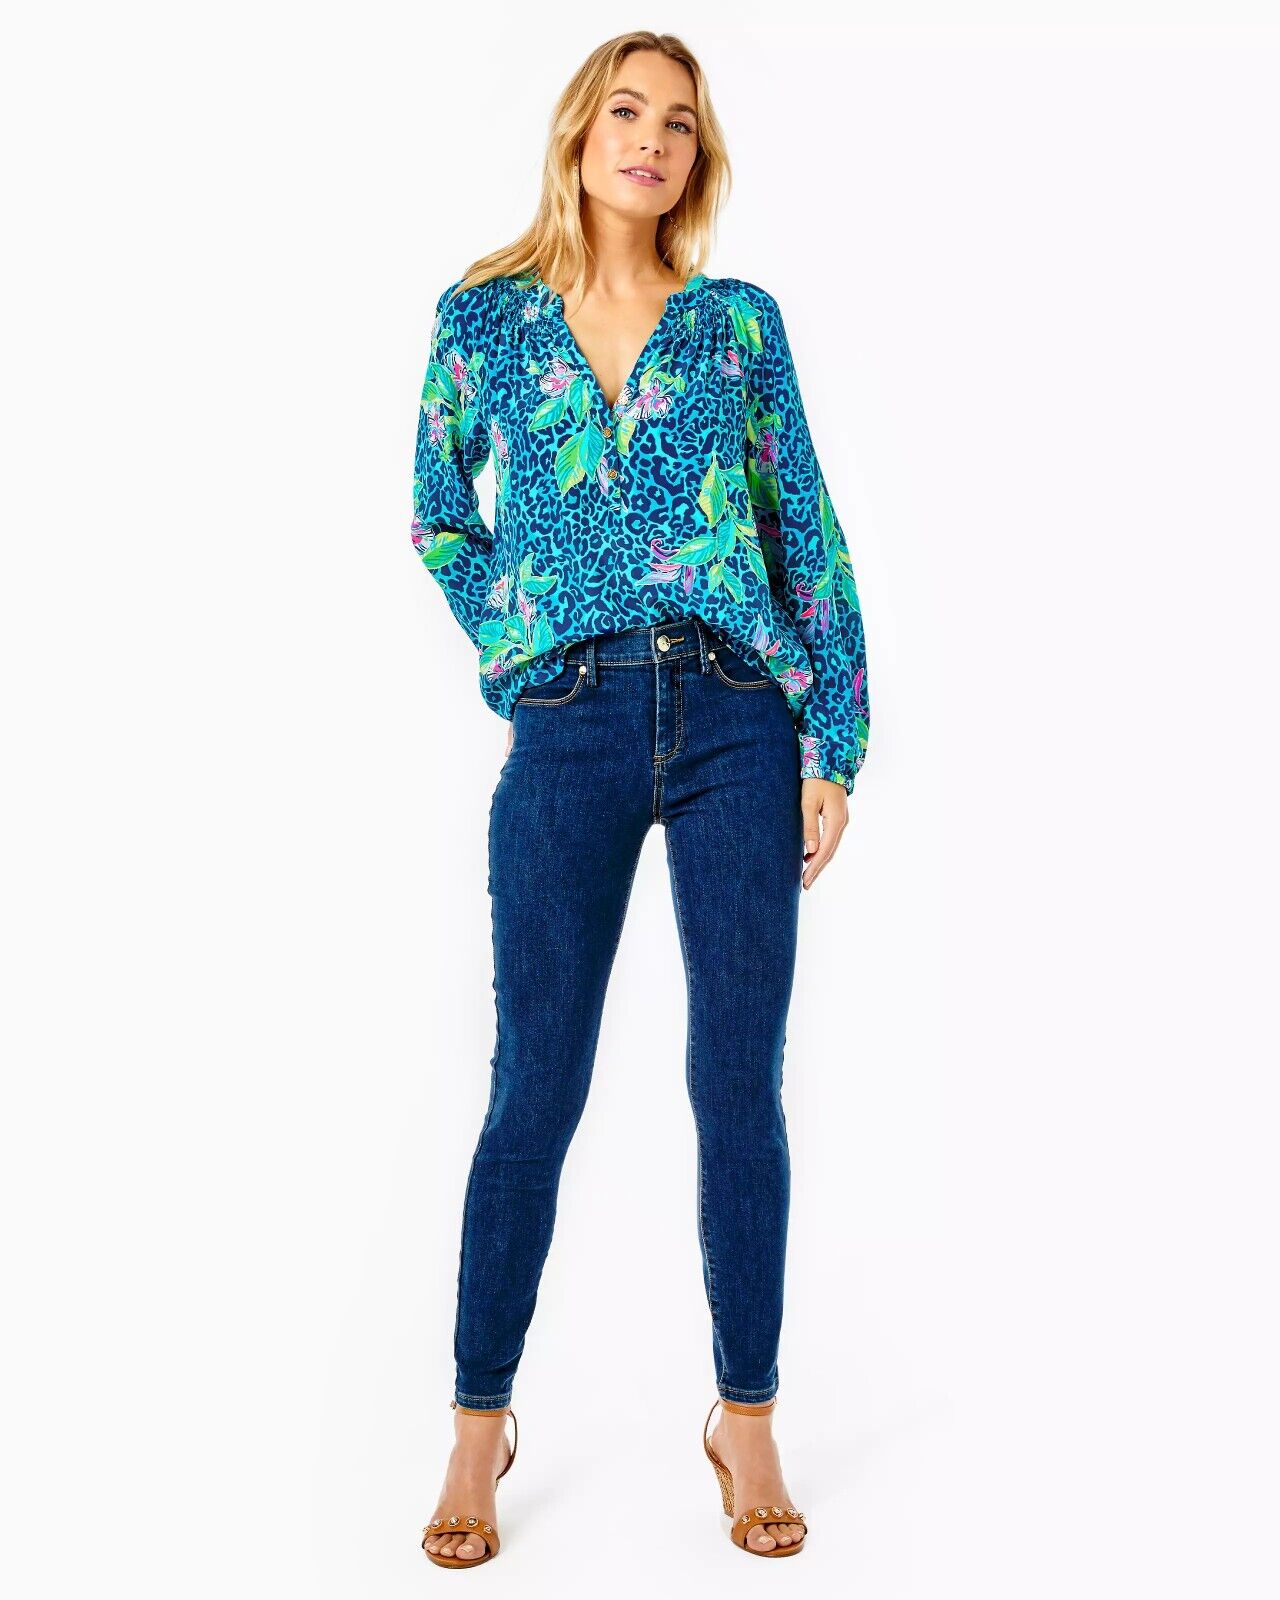 Lilly Pulitzer Eagan High Rise Skinny Jeans 100% Authentic Ankle Fit Dark Nwt